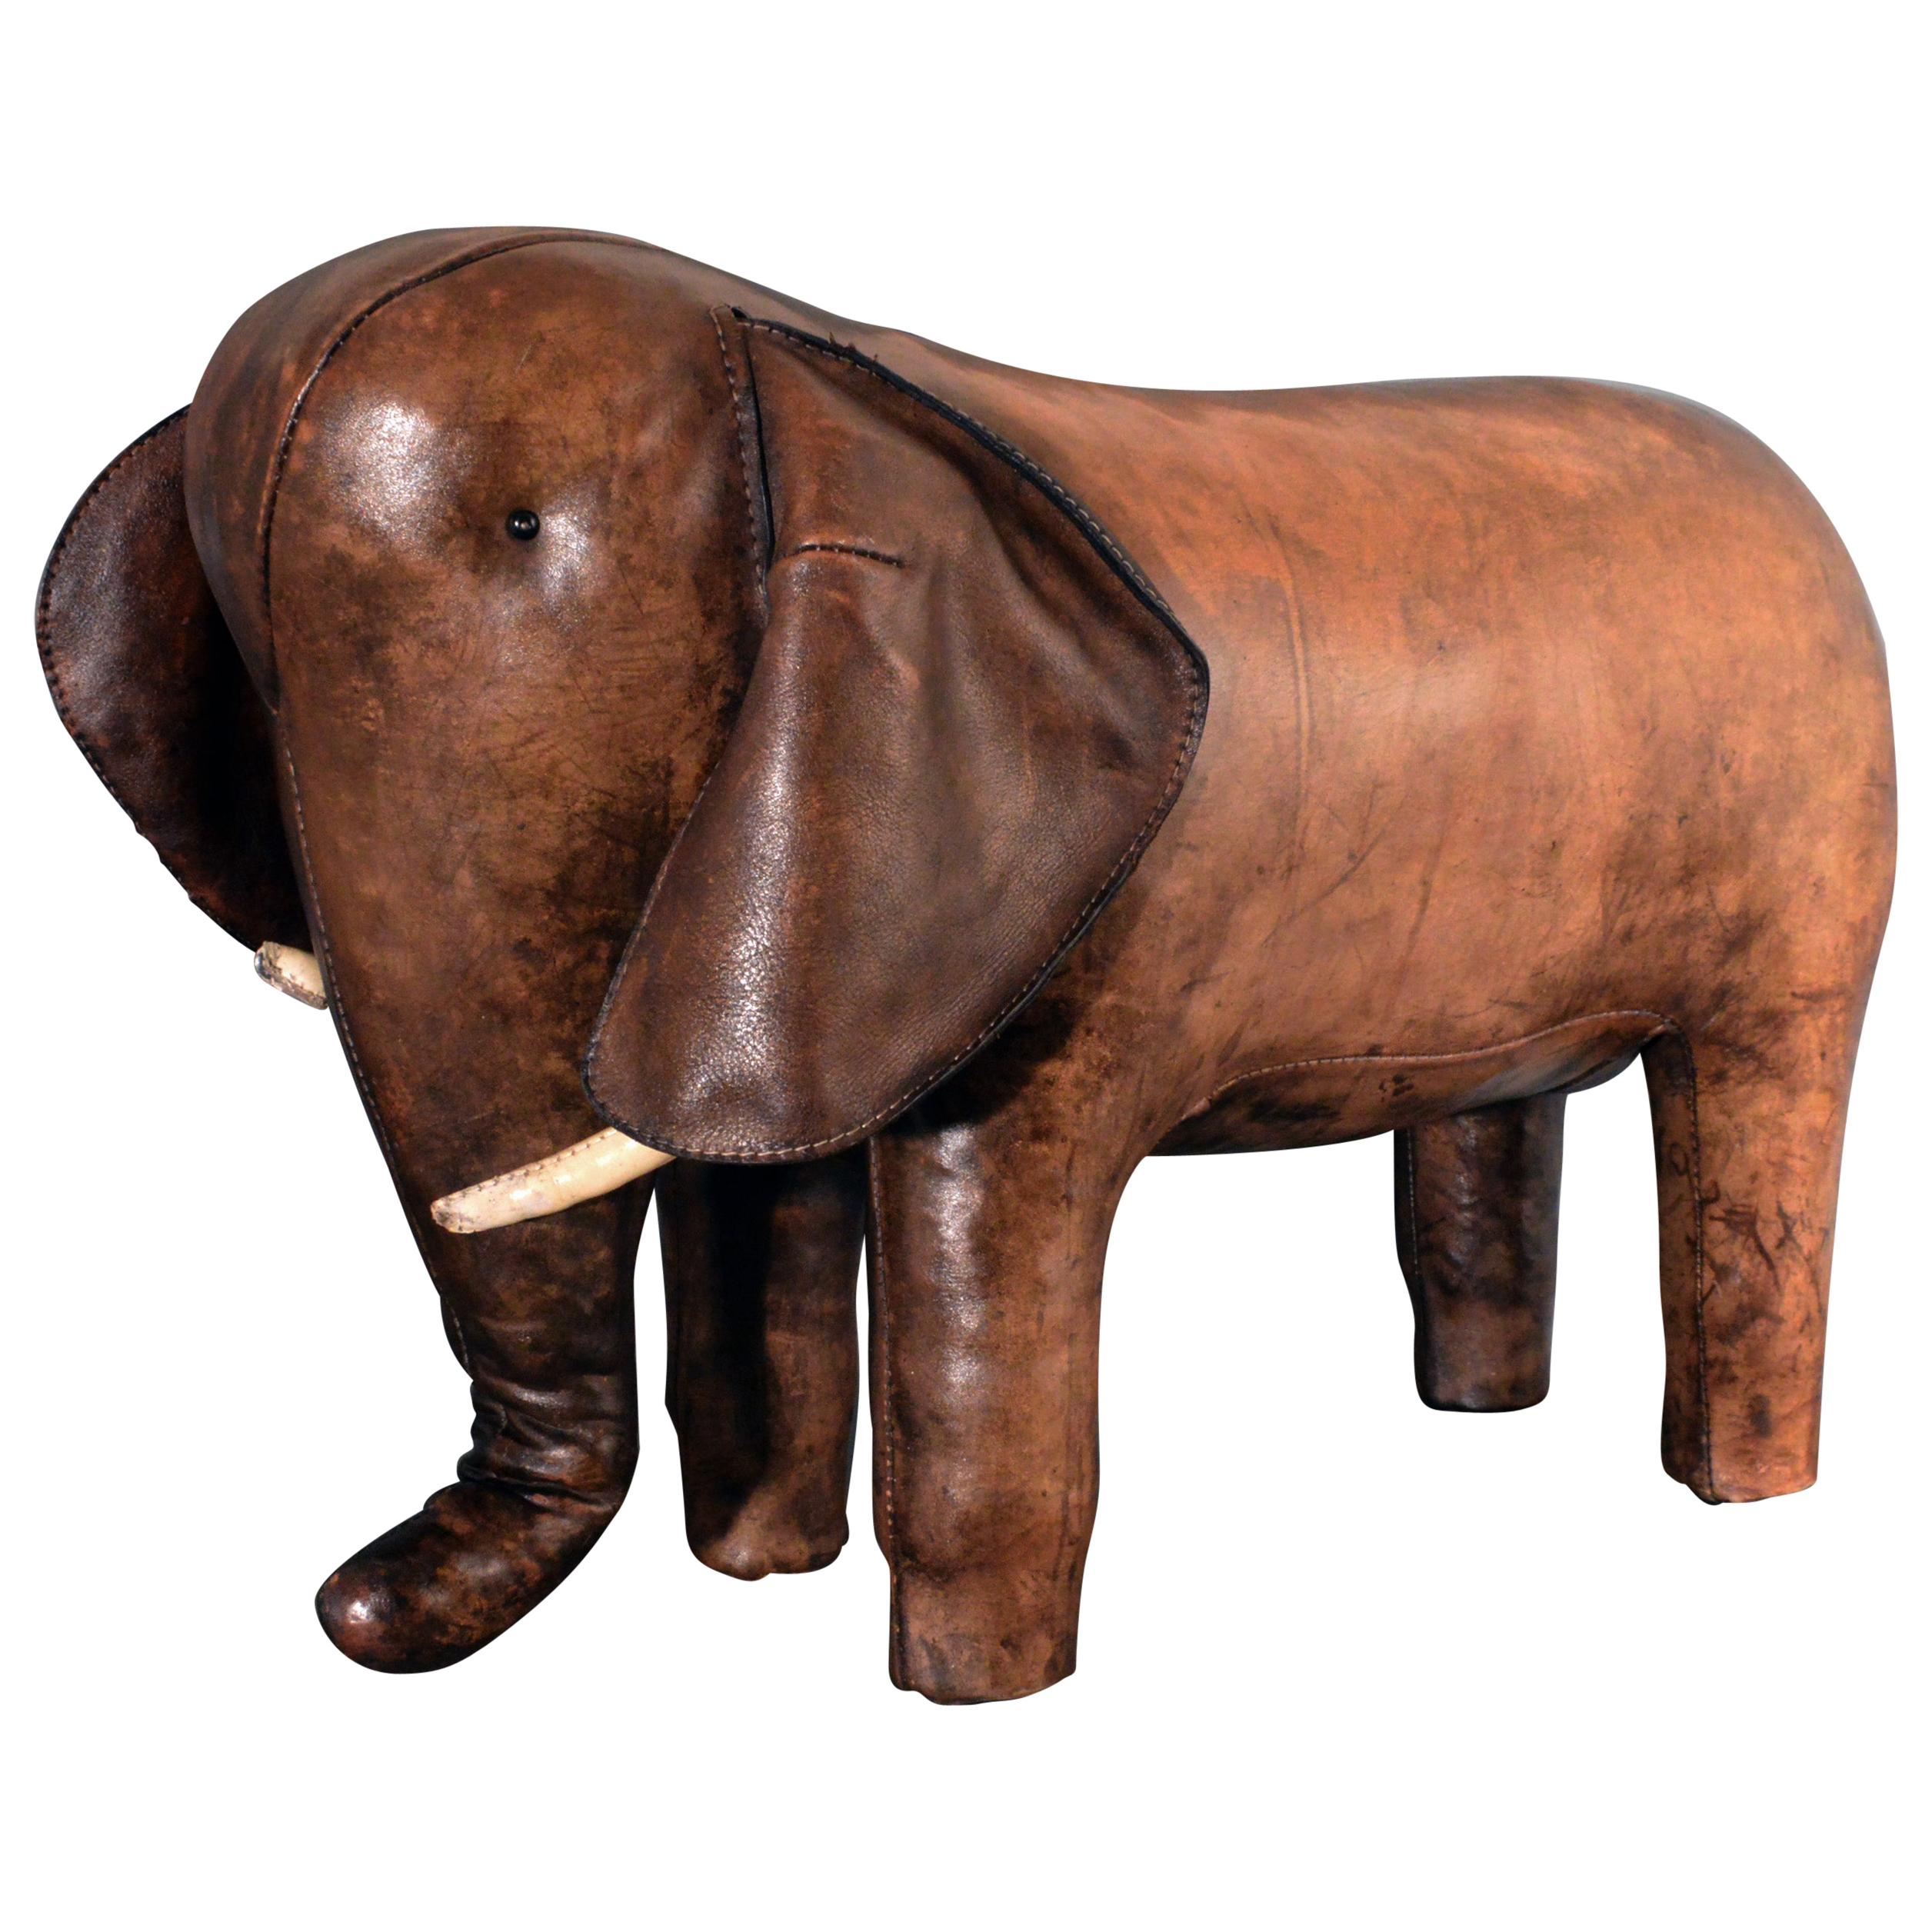 Vintage Leather Elephant Footstool, Dimitri Omersa for Abercrombie & Fitch